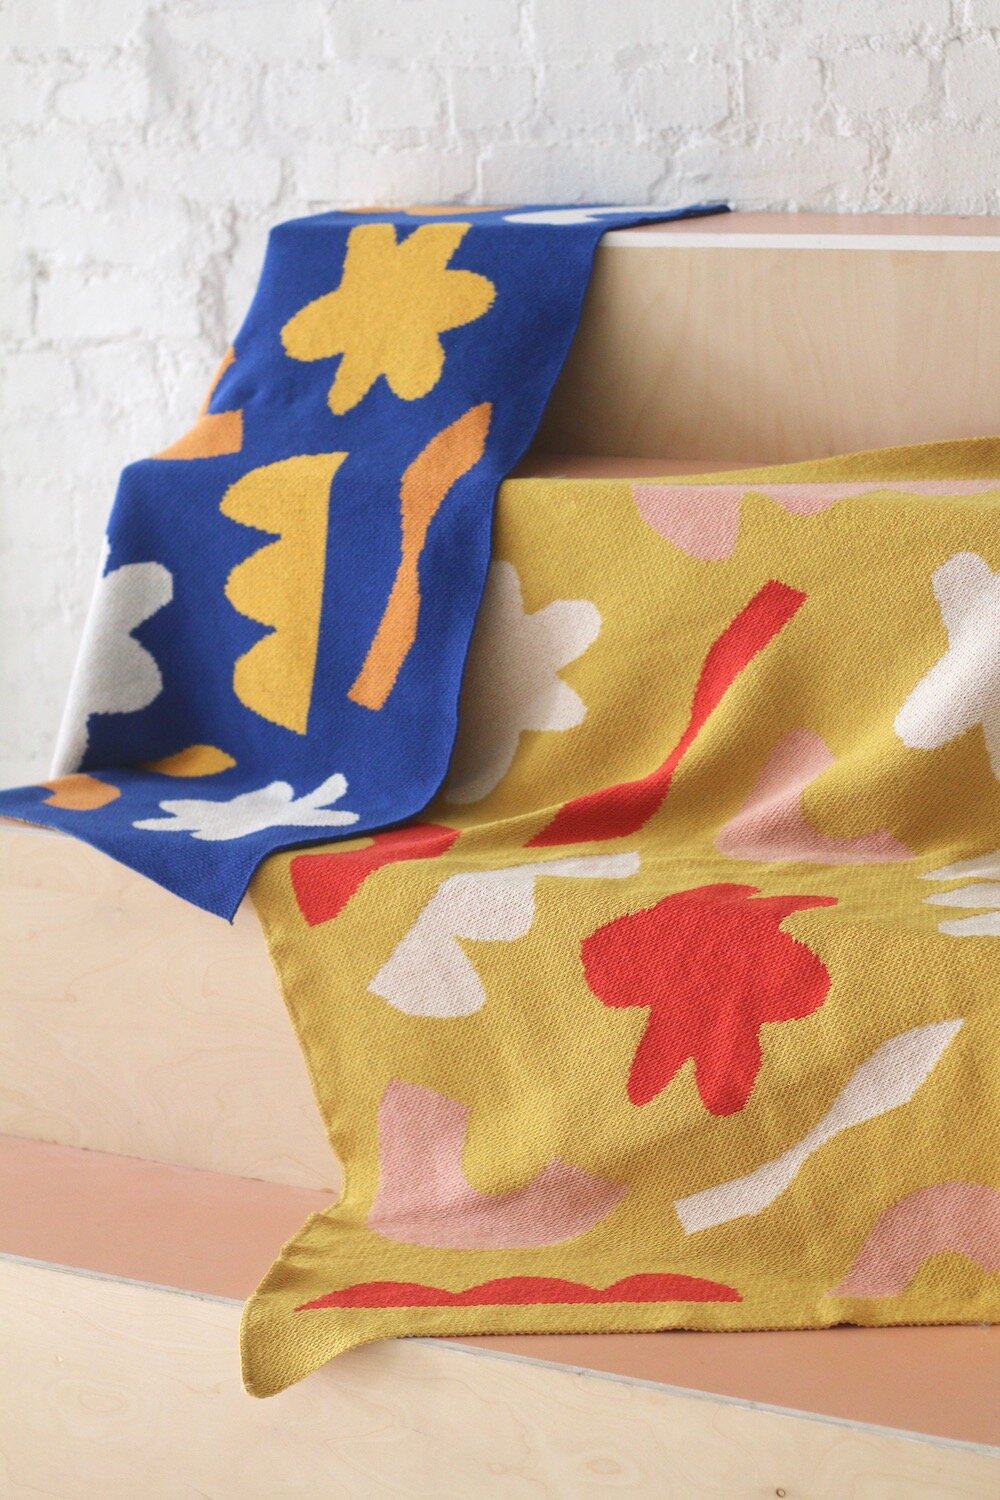 Blue and Yellow variations of the Shapes at Play geometric pattern throw